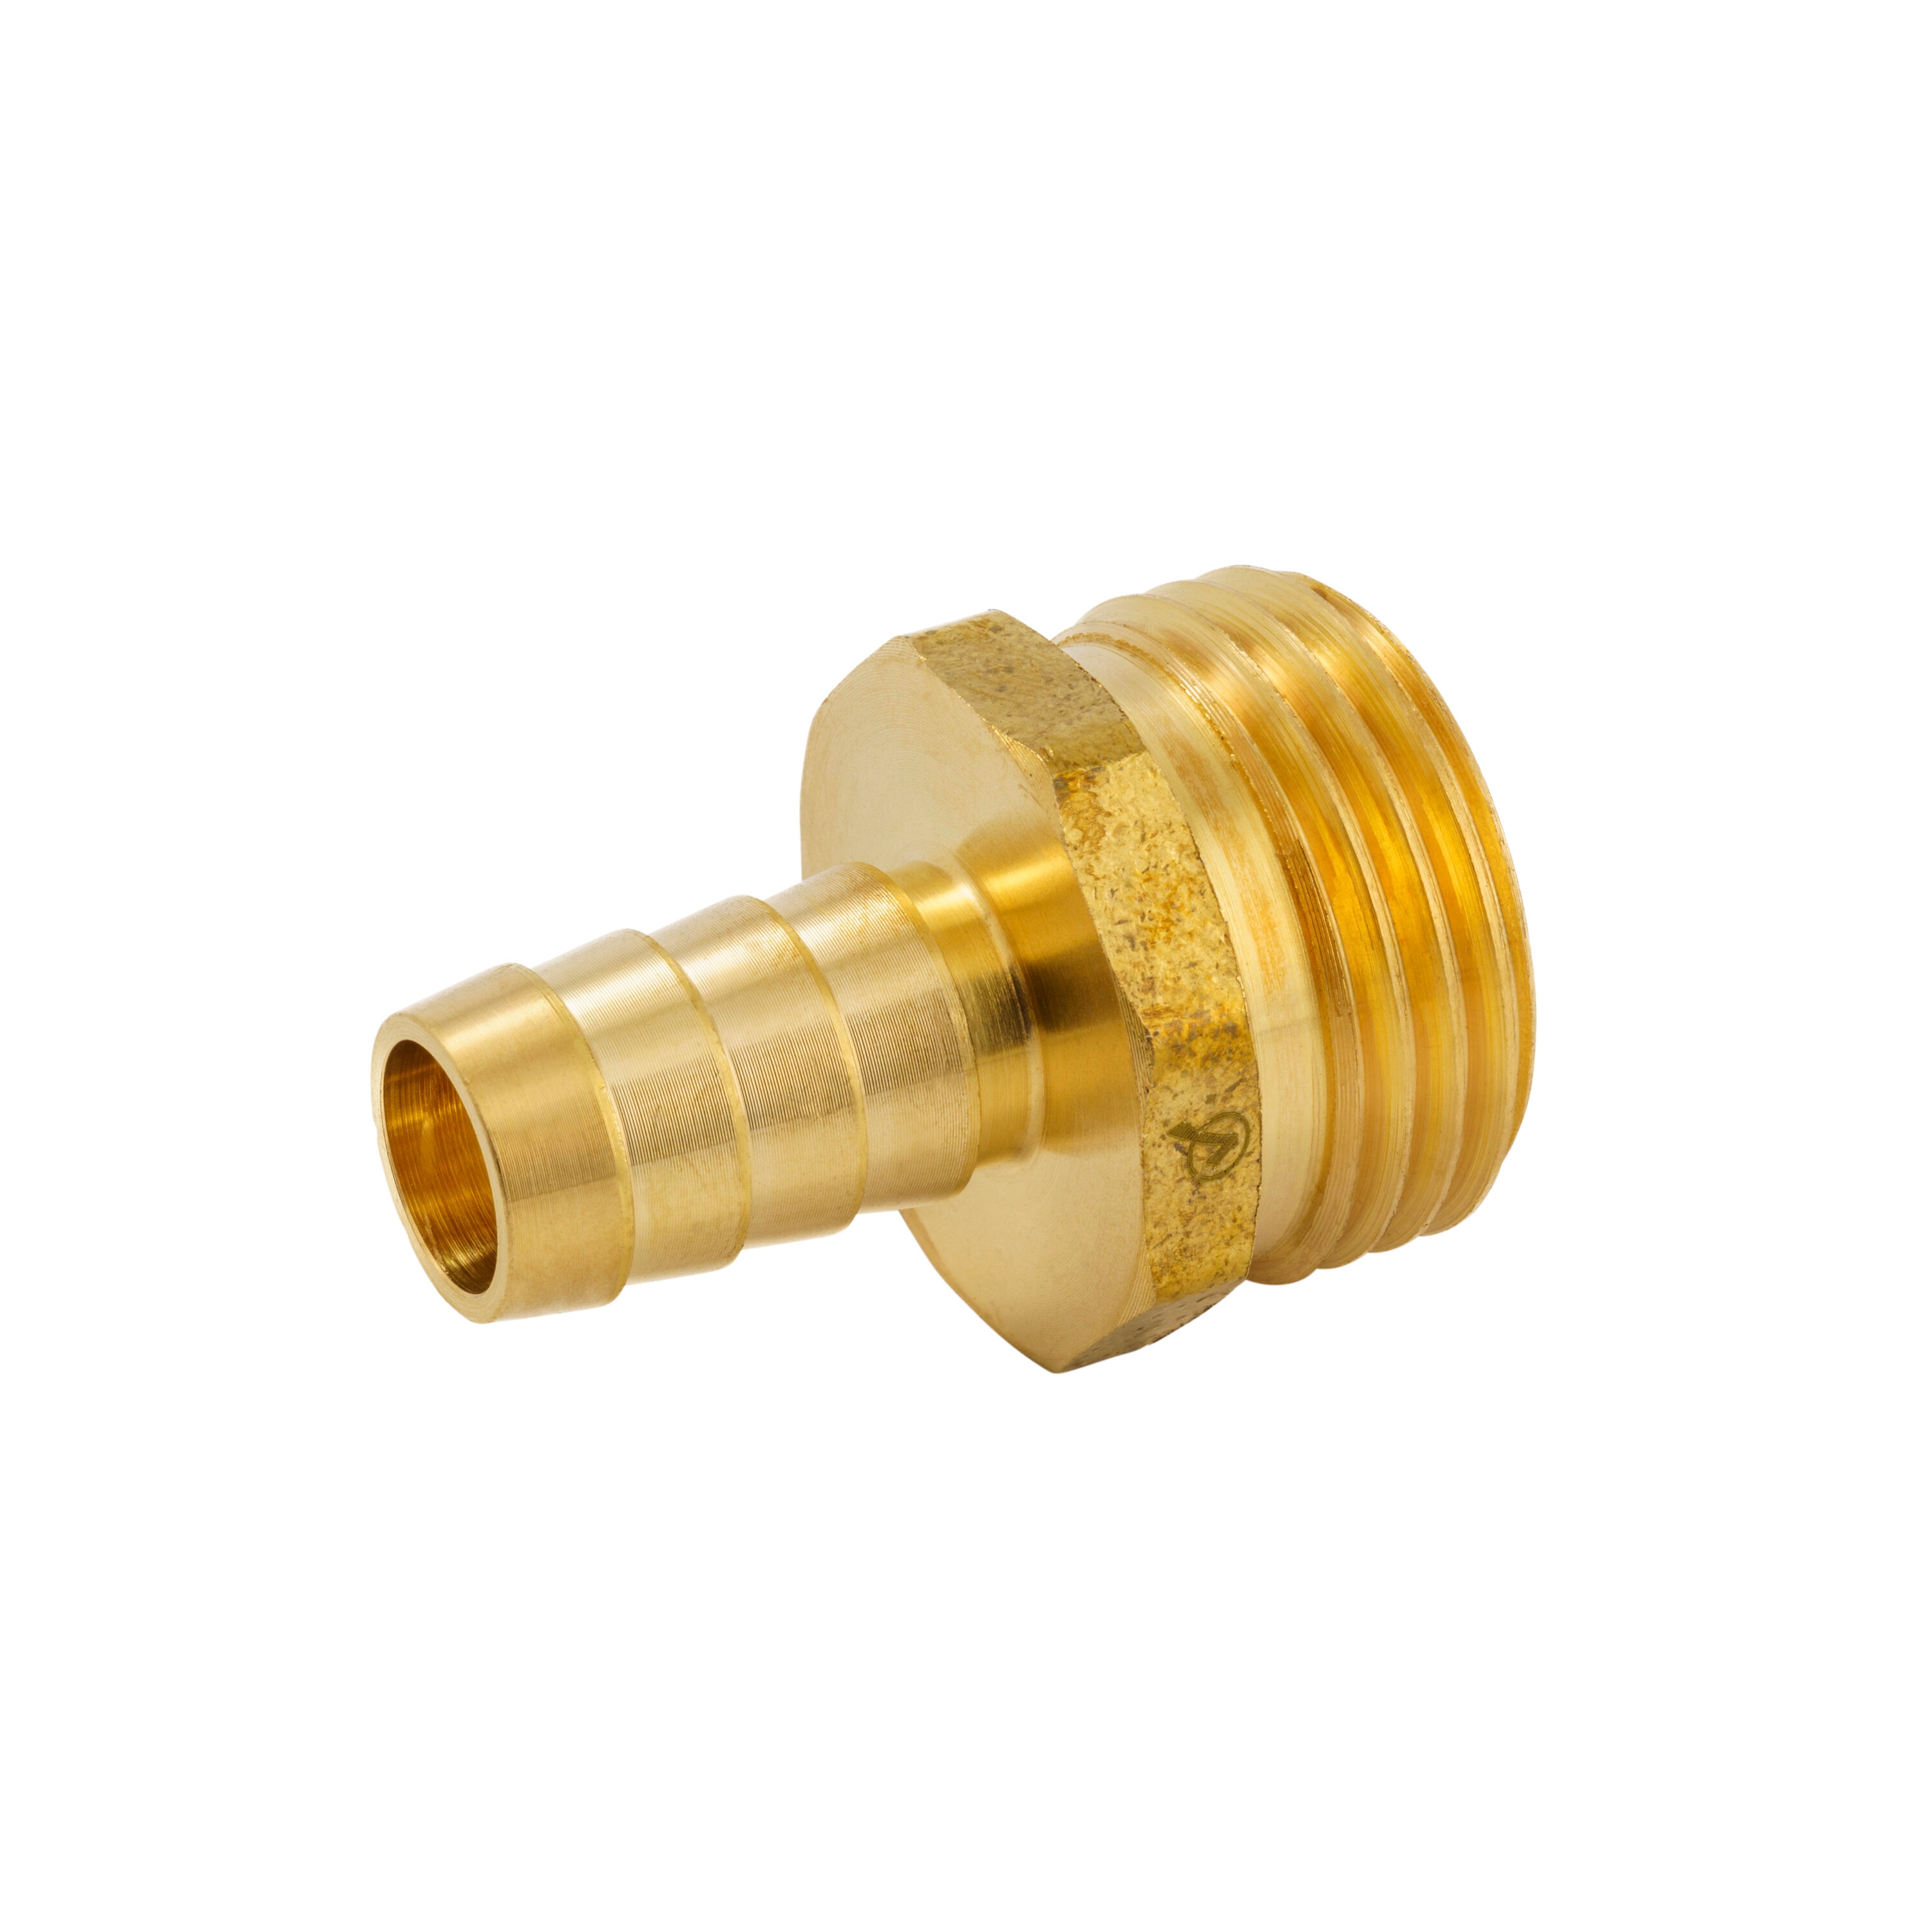 Quickun Brass Hose Barb Reducer 1 to 5/8 Barbed Reducer Fitting Reducing  Splicer Mender Union Adapter for Air Water Fuel